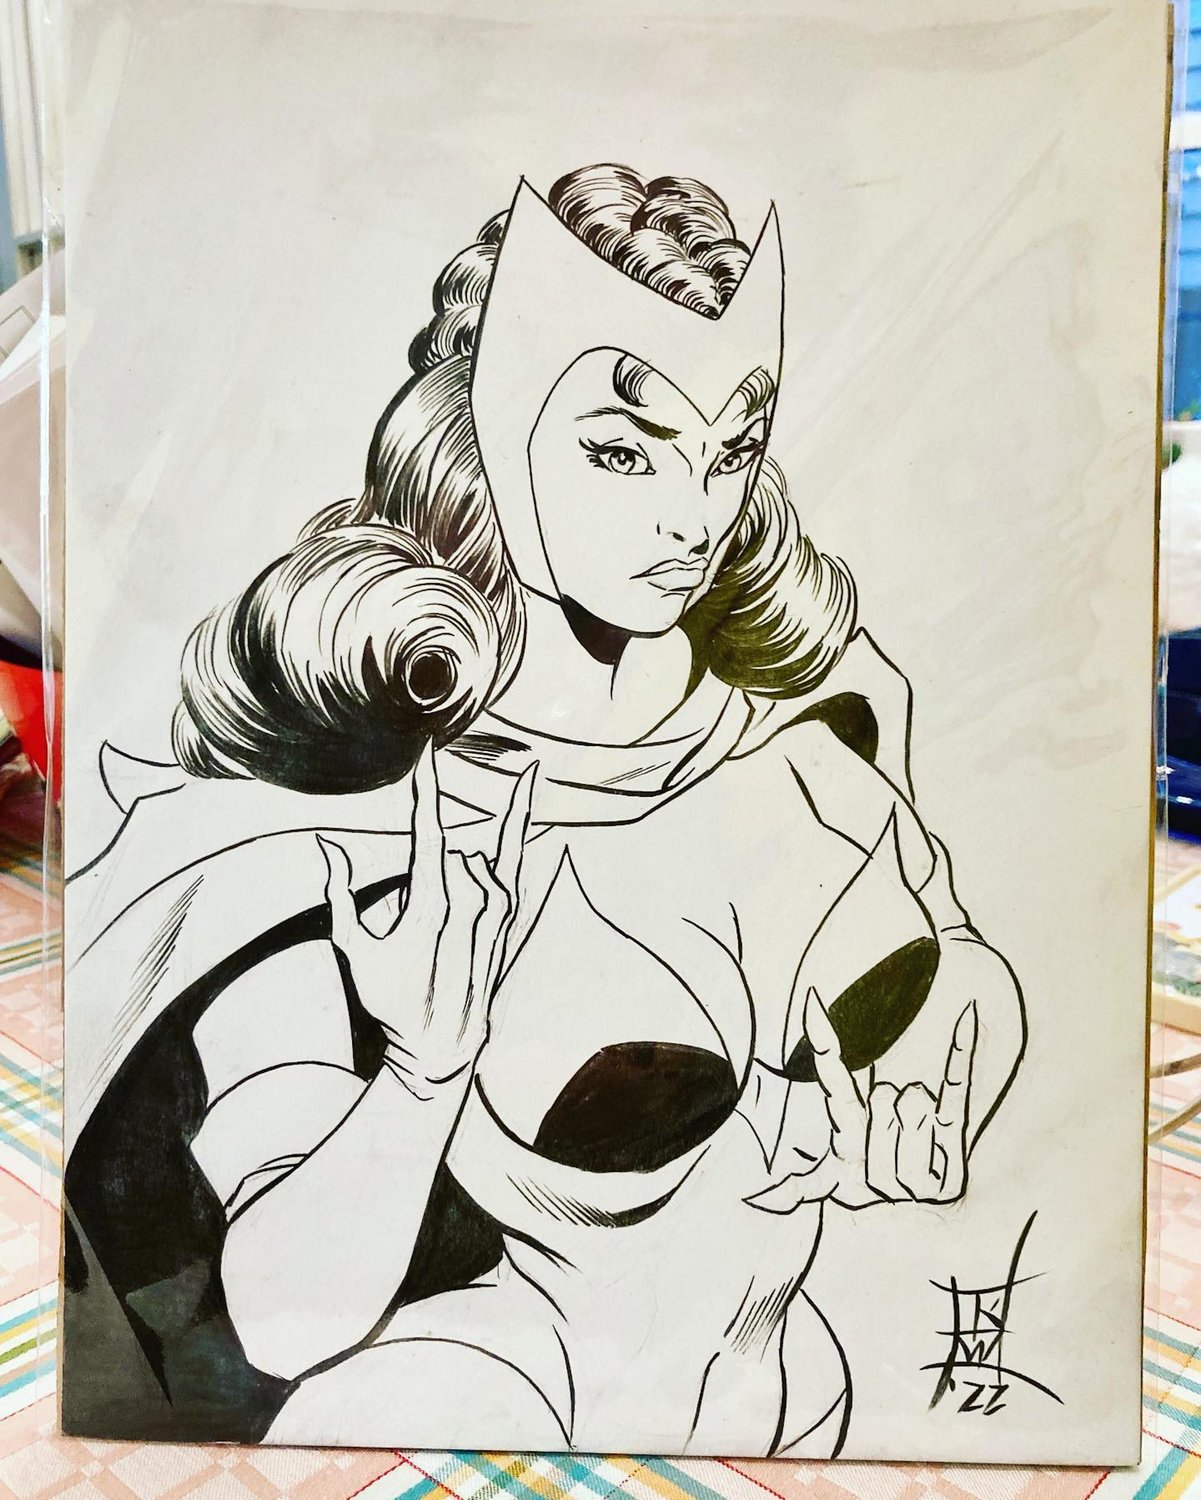 A Marvel artist’s sketch of the Scarlett Witch will also be raffled.